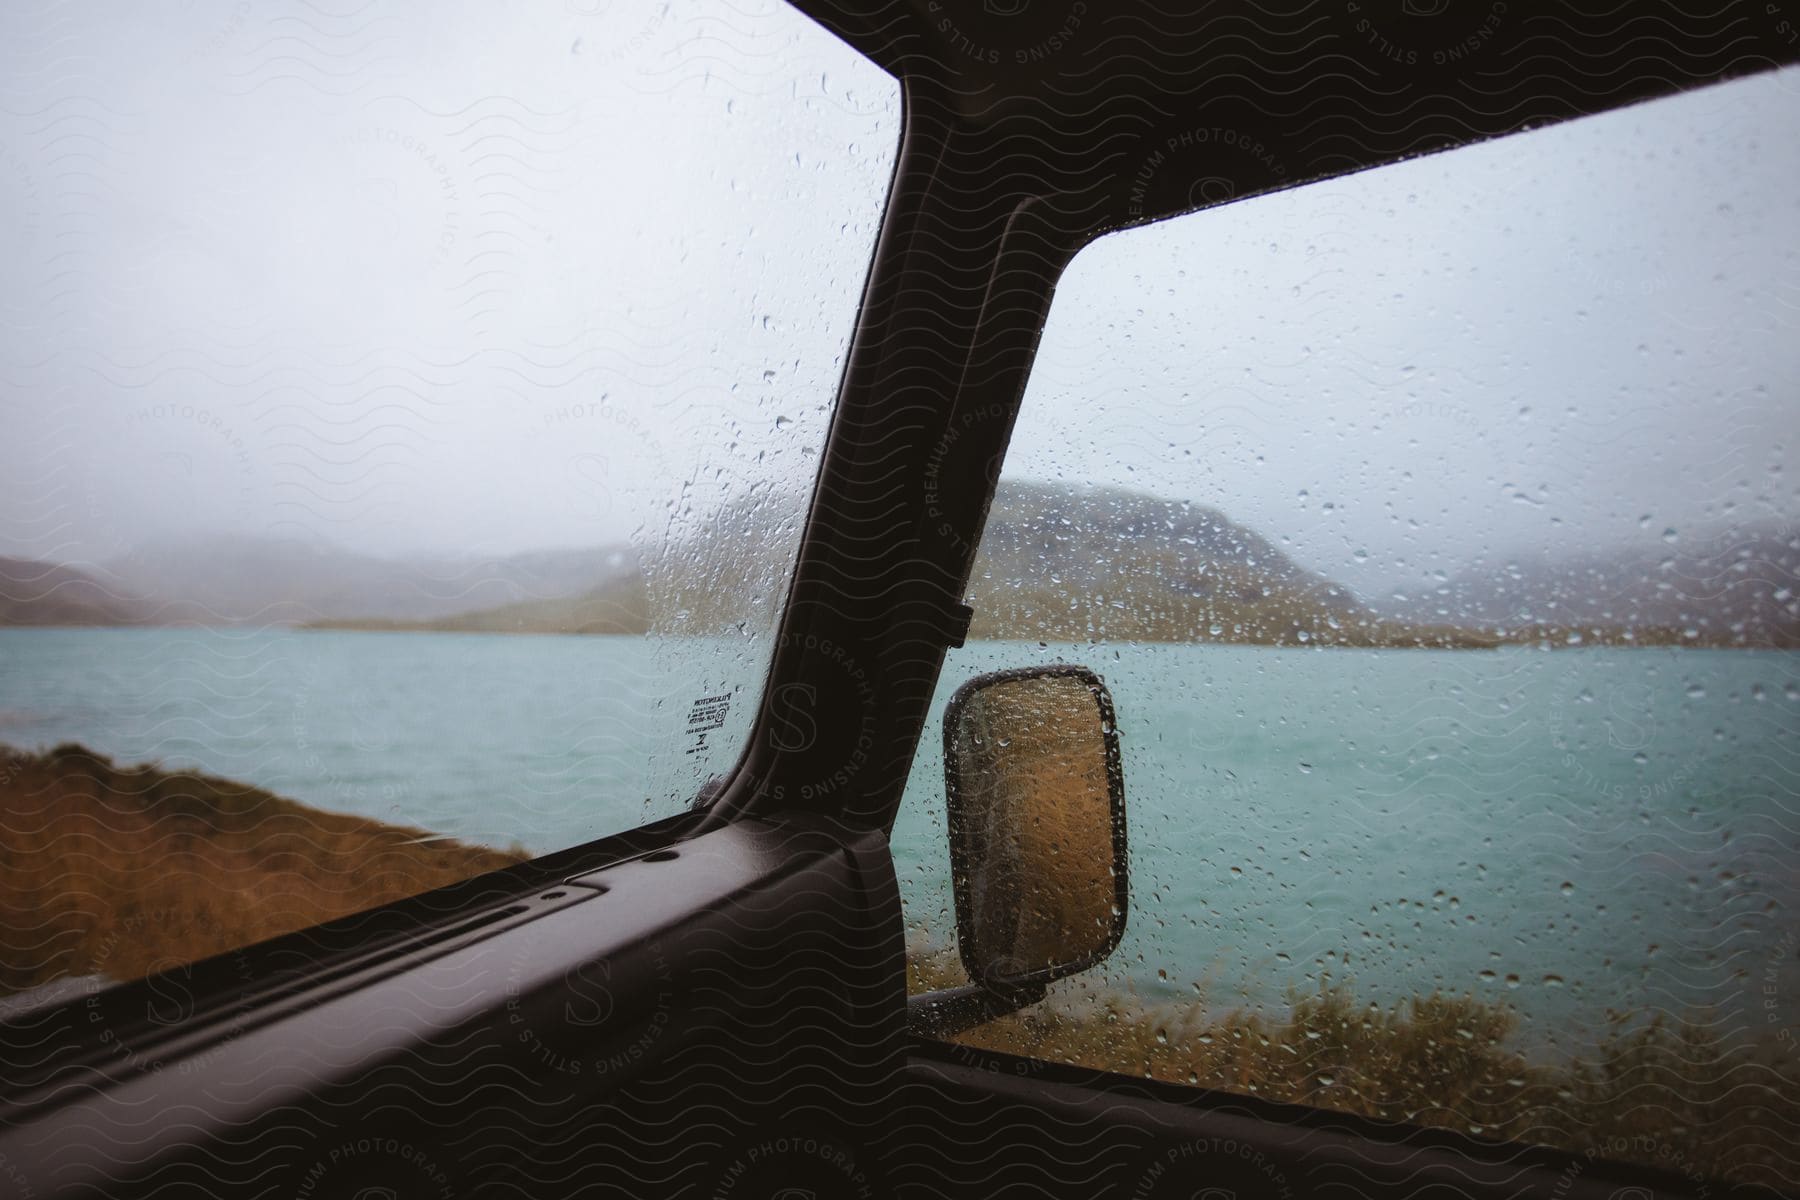 A car door provides a view of a body of water and a hill in the background